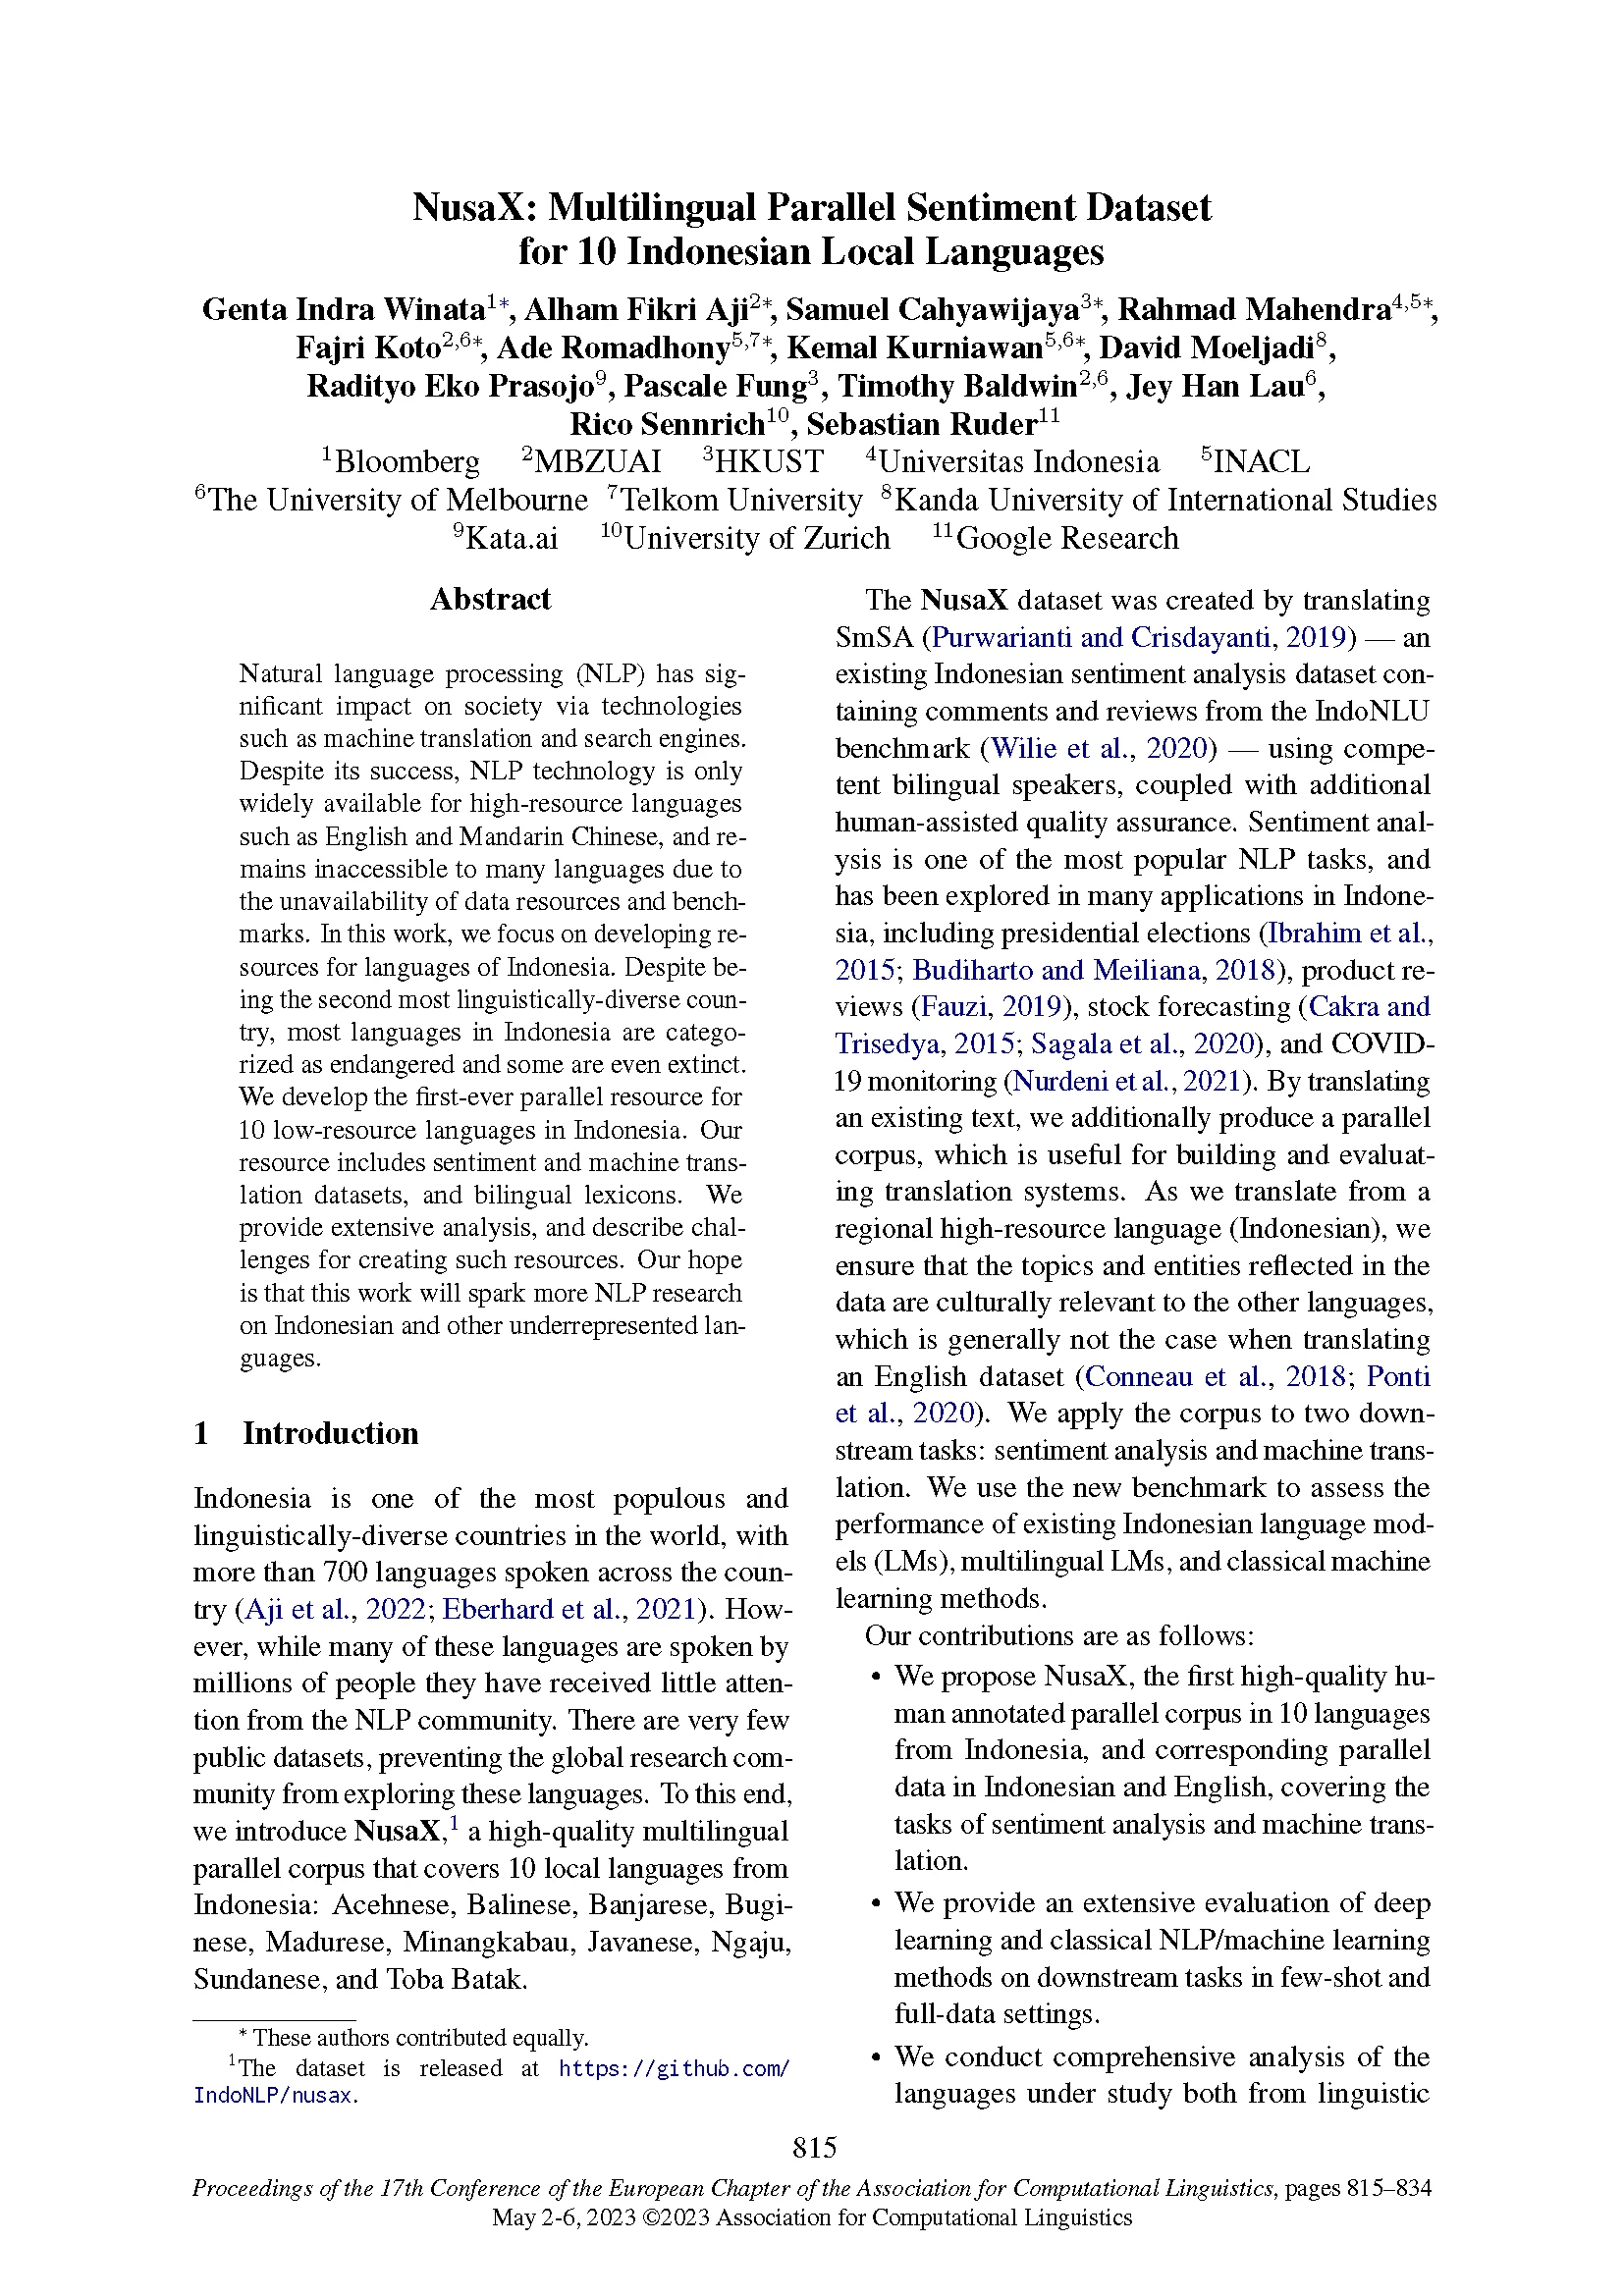 Front page of EACL 2023 paper "NusaX: Multilingual Parallel Sentiment Dataset for 10 Indonesian Local Languages"